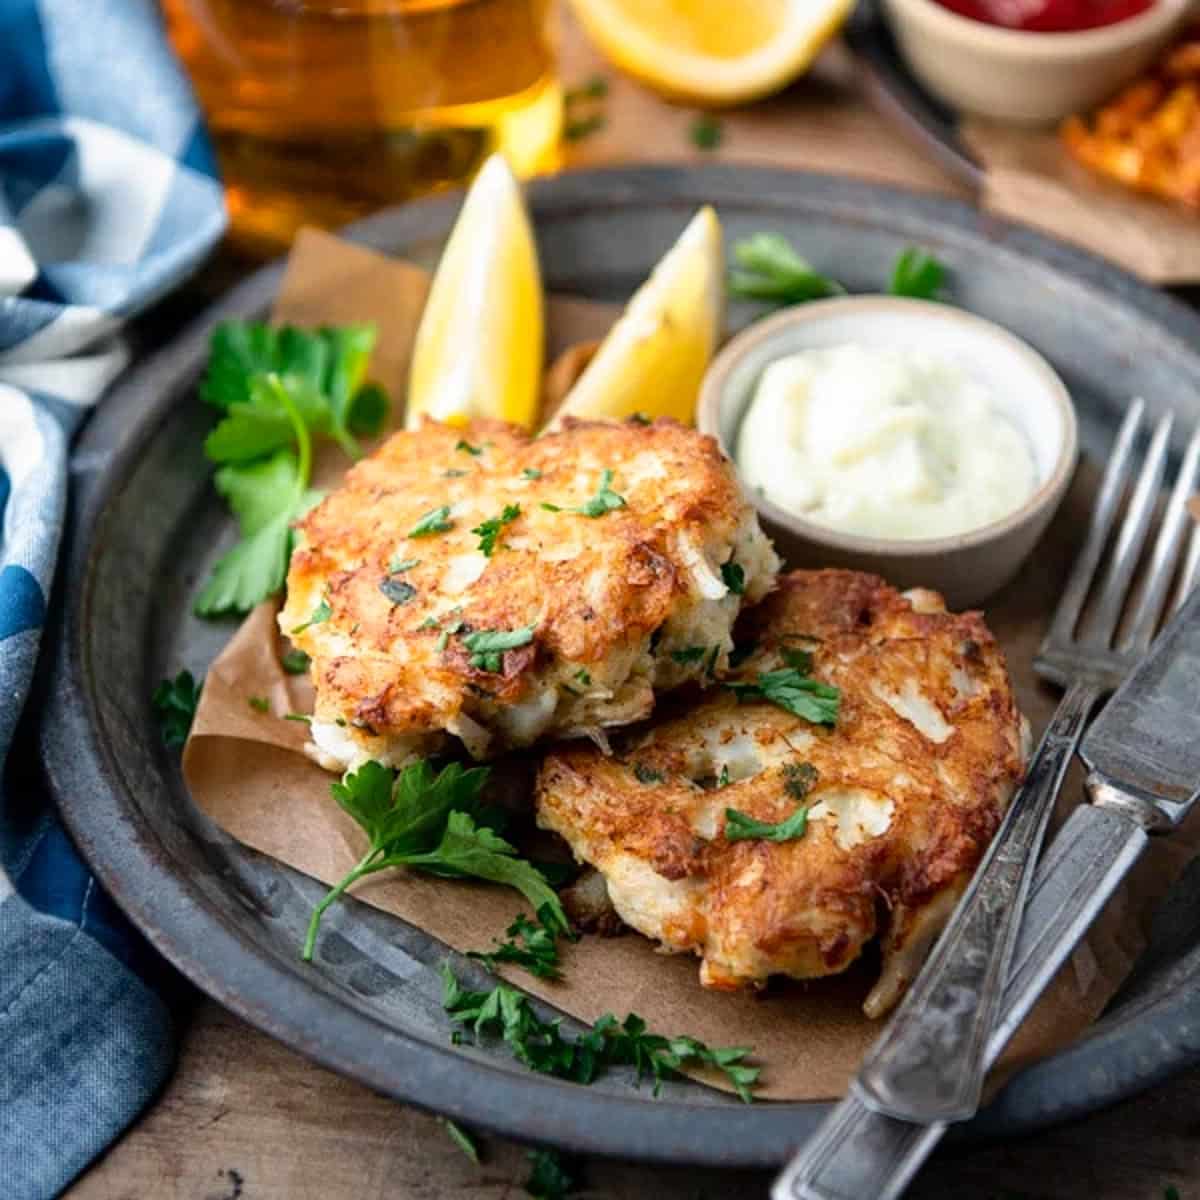 How Long To Bake Crab Cakes At 400